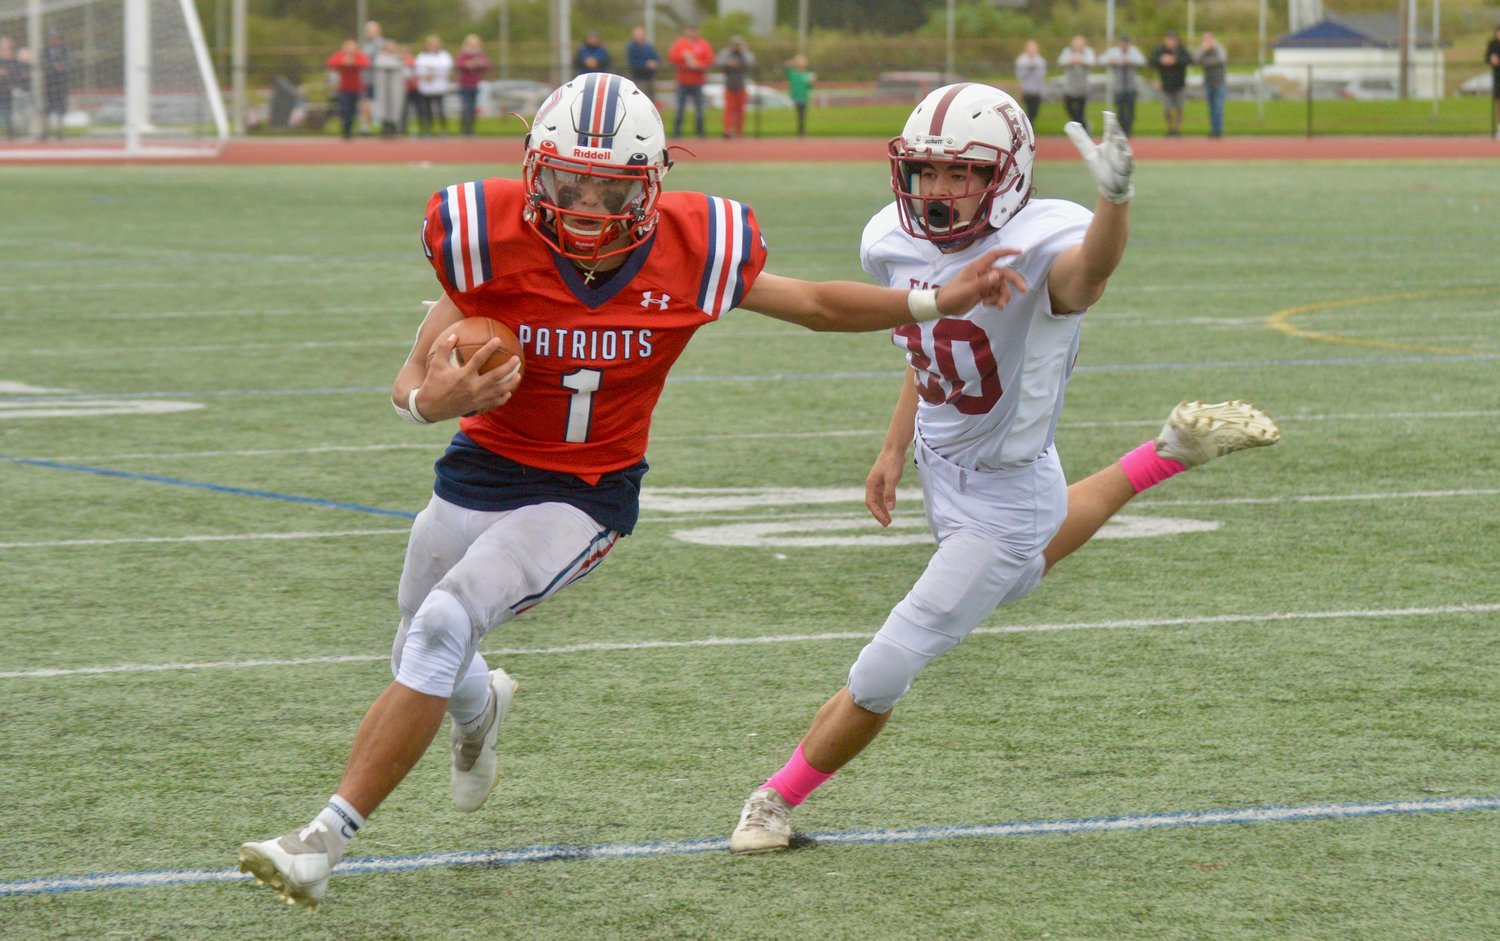 The Patriots’ Carson Conheeny rushes for a big gain in the second half as he’s hotly pursued by an East Greenwich defender.